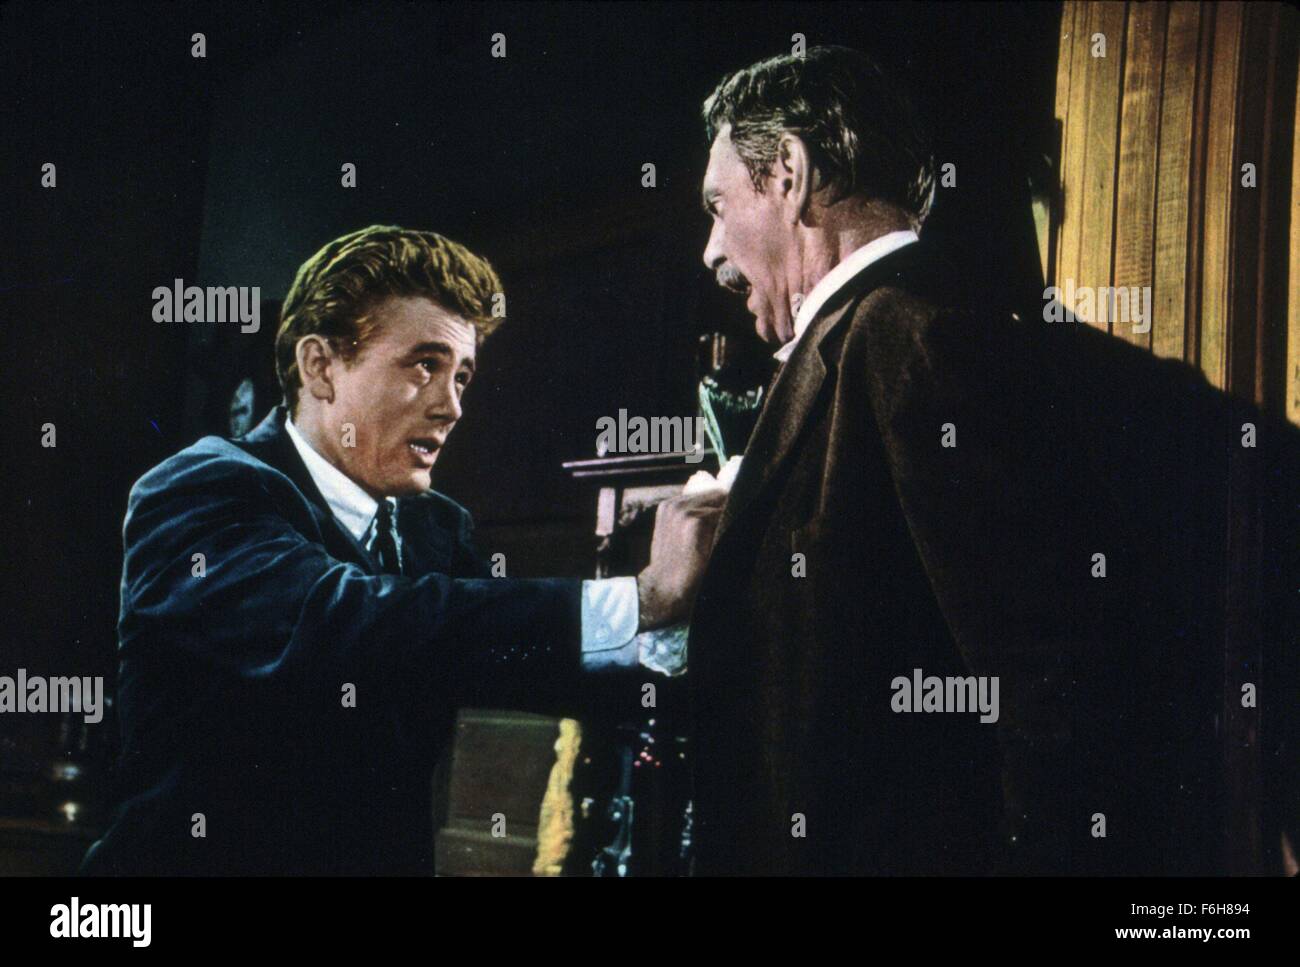 1955, Film Title: EAST OF EDEN, Director: ELIA KAZAN, Studio: WARNER, Pictured: ARGUING, JAMES DEAN, RAYMOND MASSEY, PUSHING, CONFLICT, AGGRESSIVE, SUIT, ANGRY, YELLING, FIGHT. (Credit Image: SNAP) Stock Photo